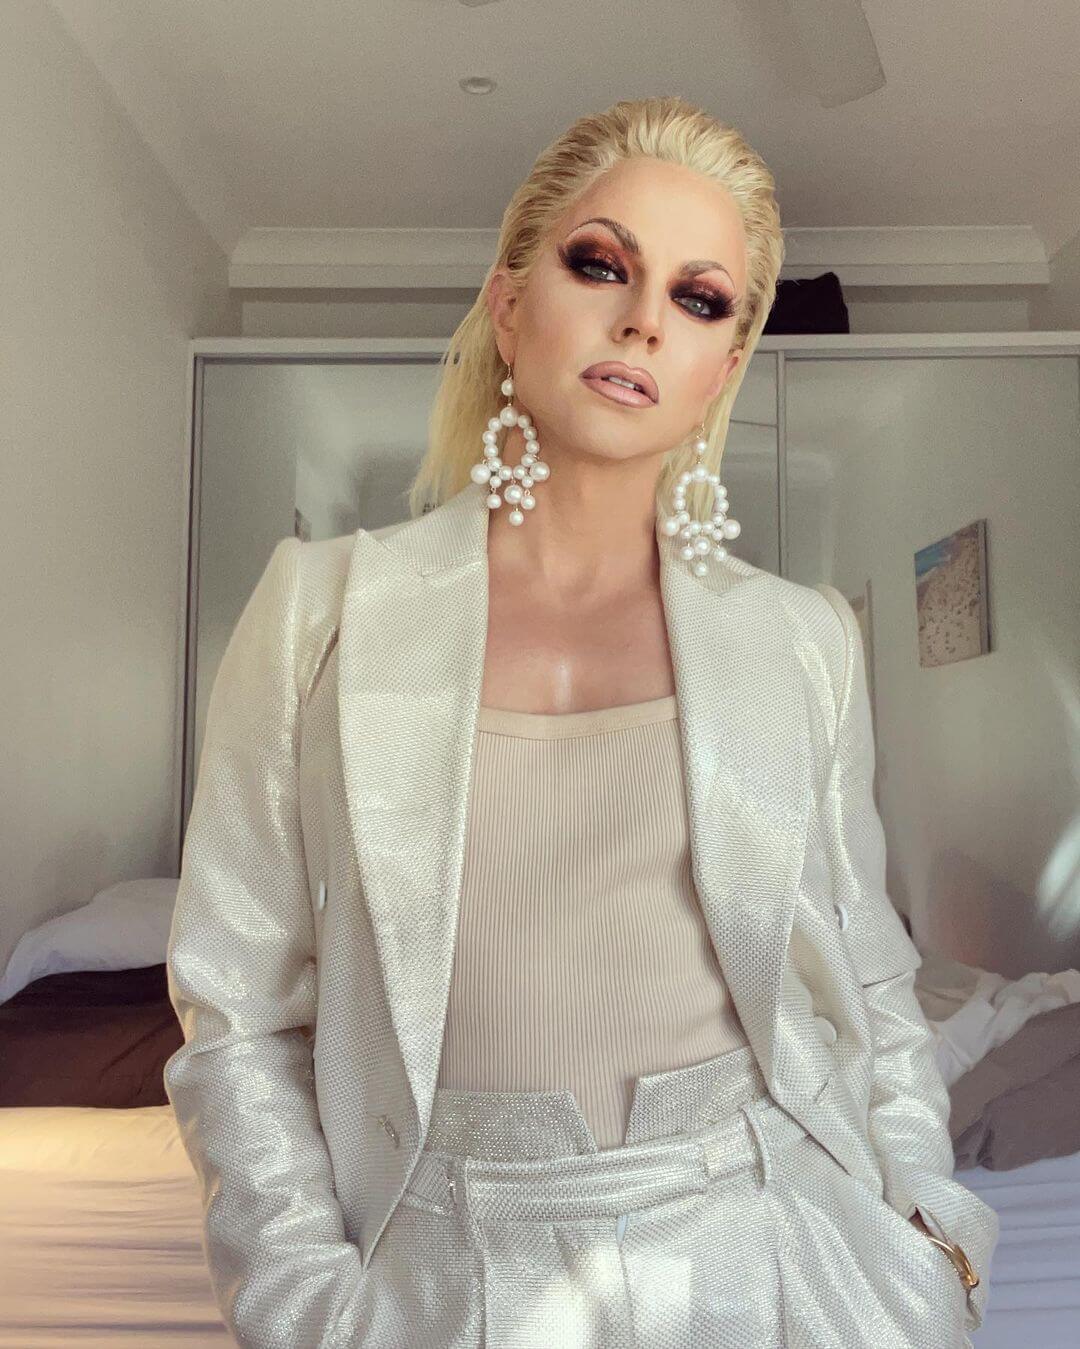 courtney act, drag queen famose